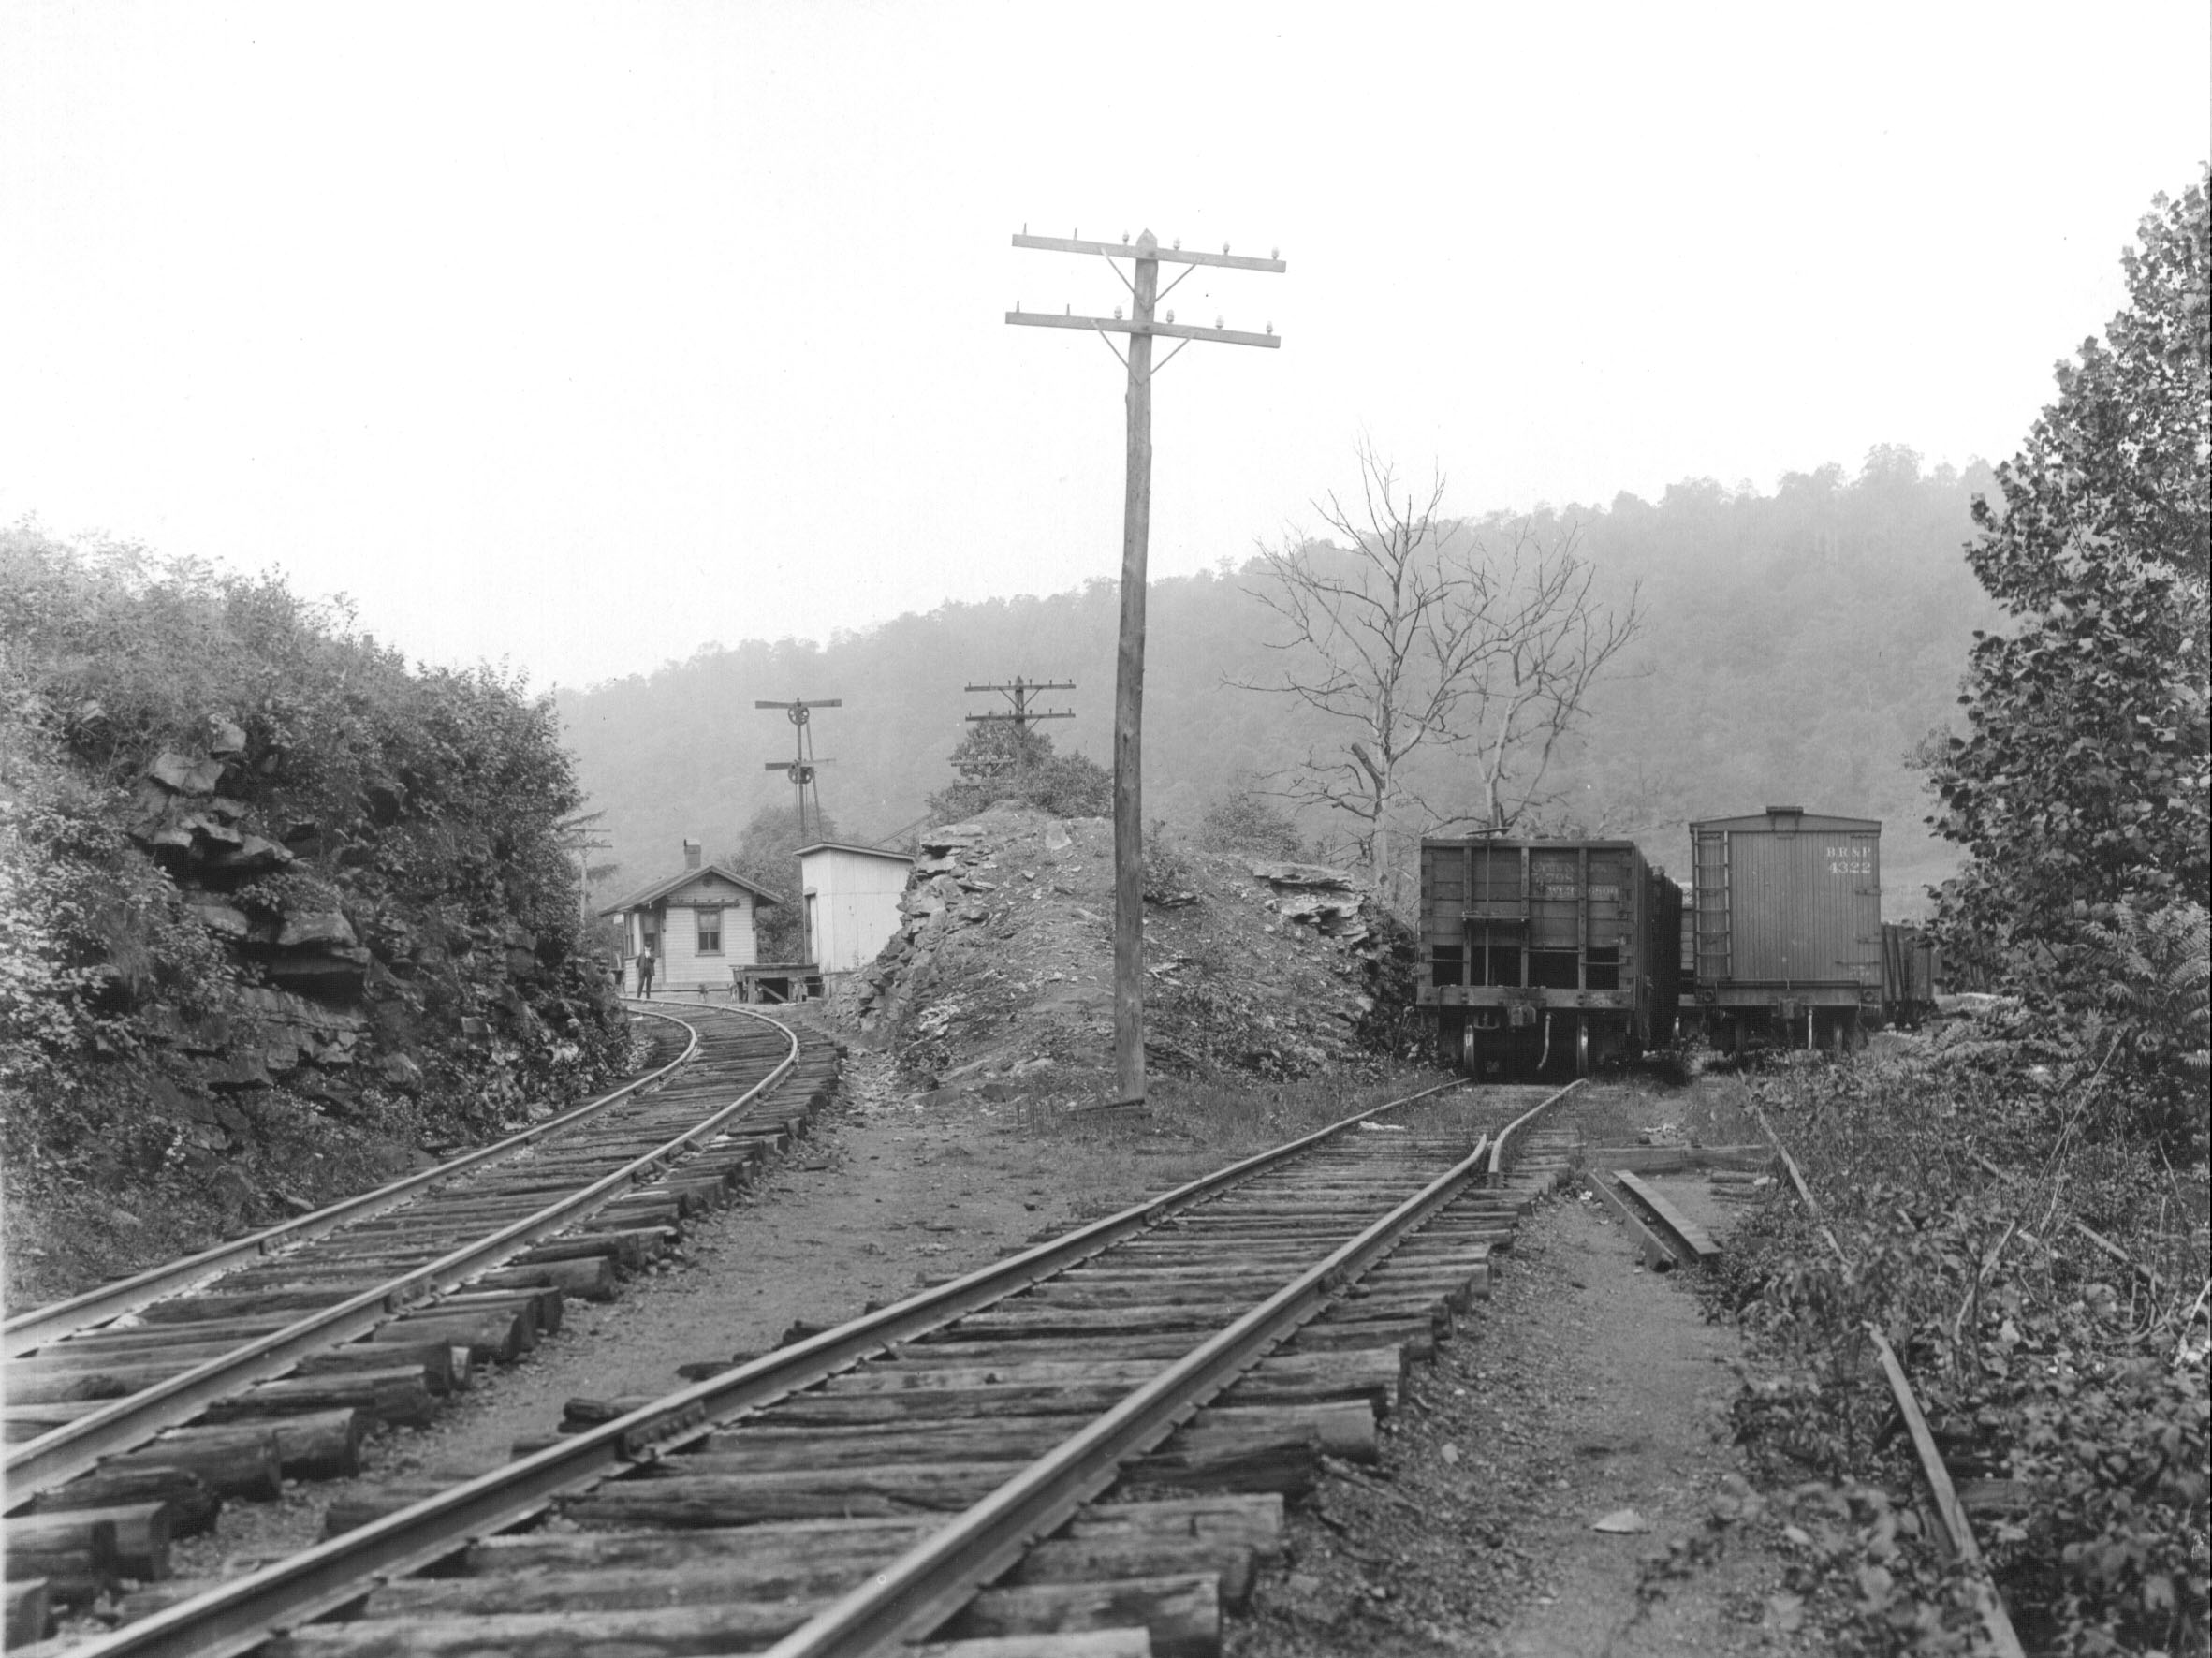  Early photo of Barrelville MD railroad junction.